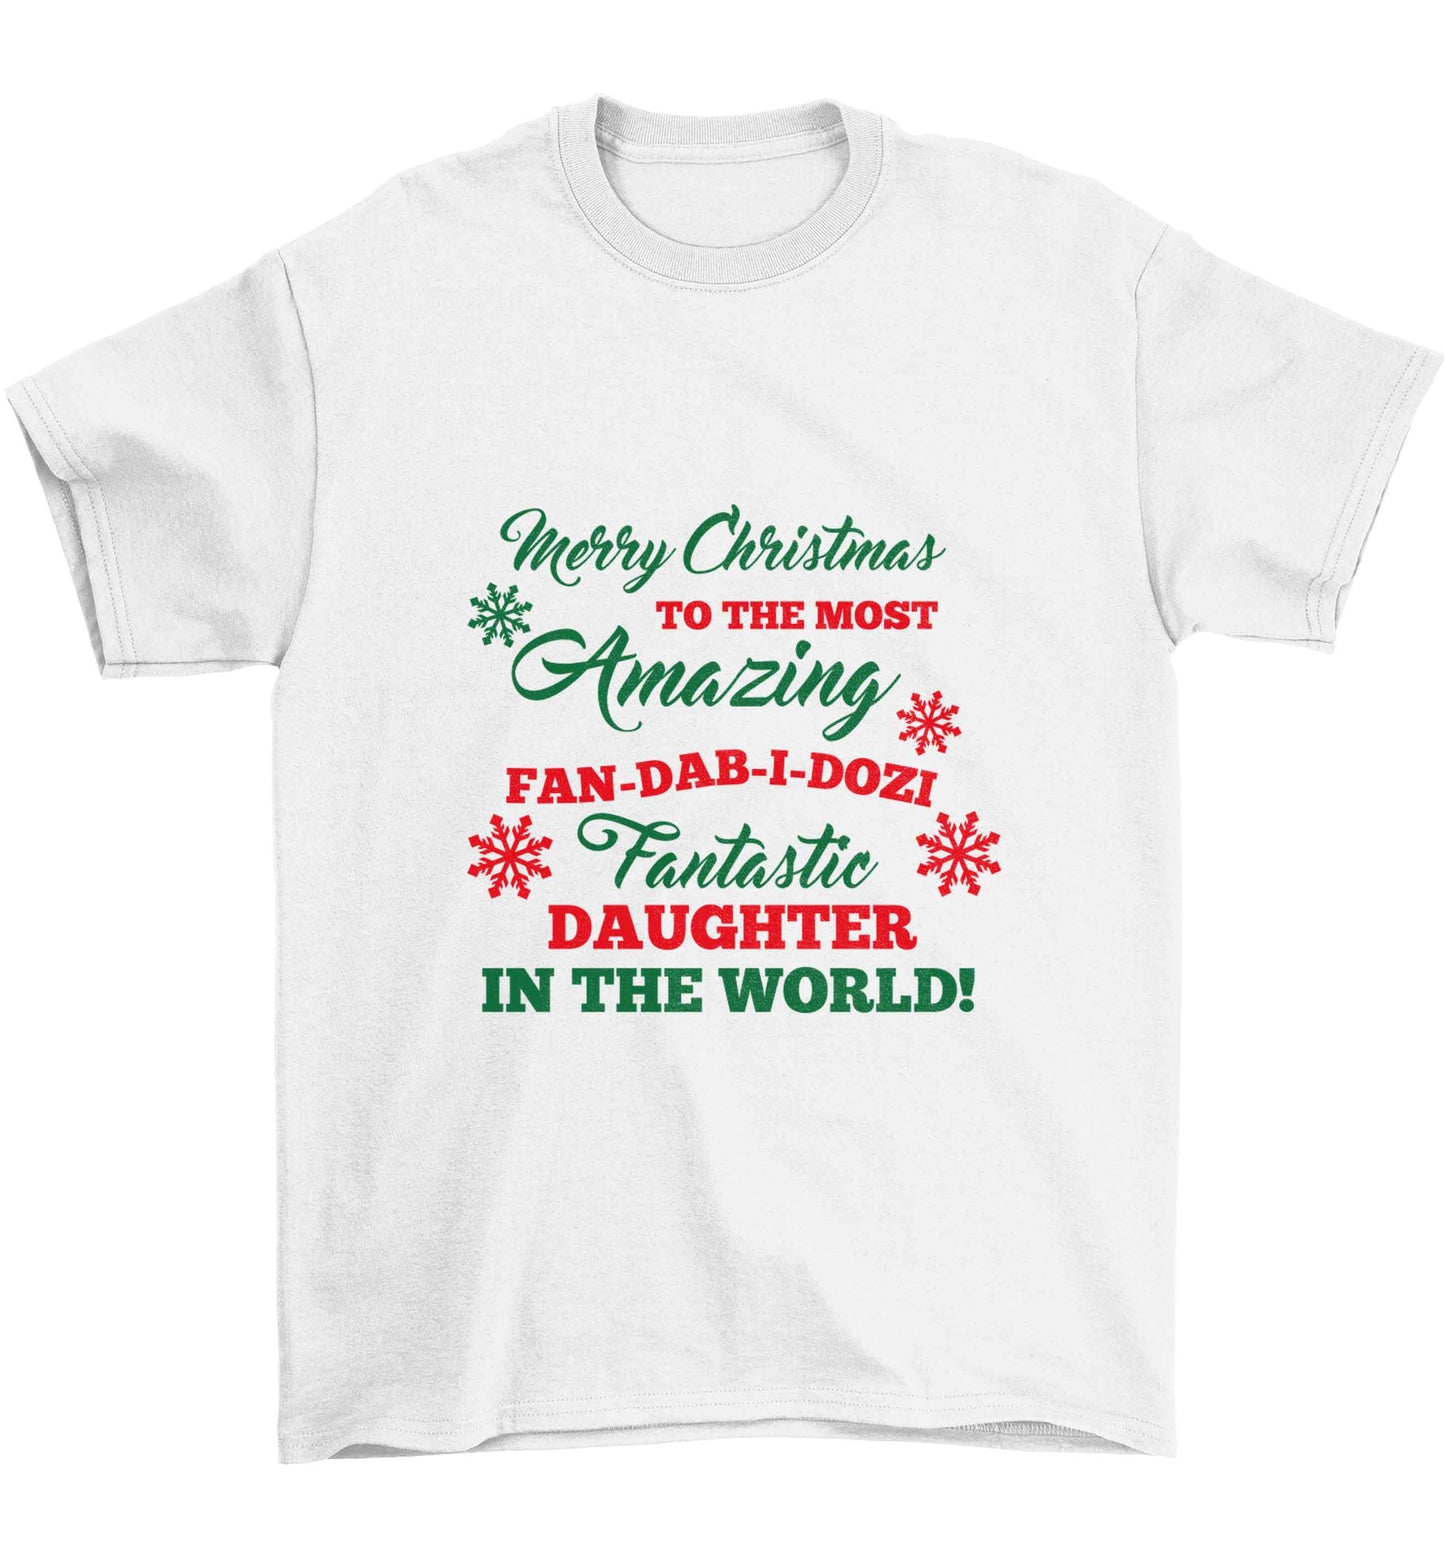 Merry Christmas to the most amazing fan-dab-i-dozi fantasic Daughter in the world Children's white Tshirt 12-13 Years